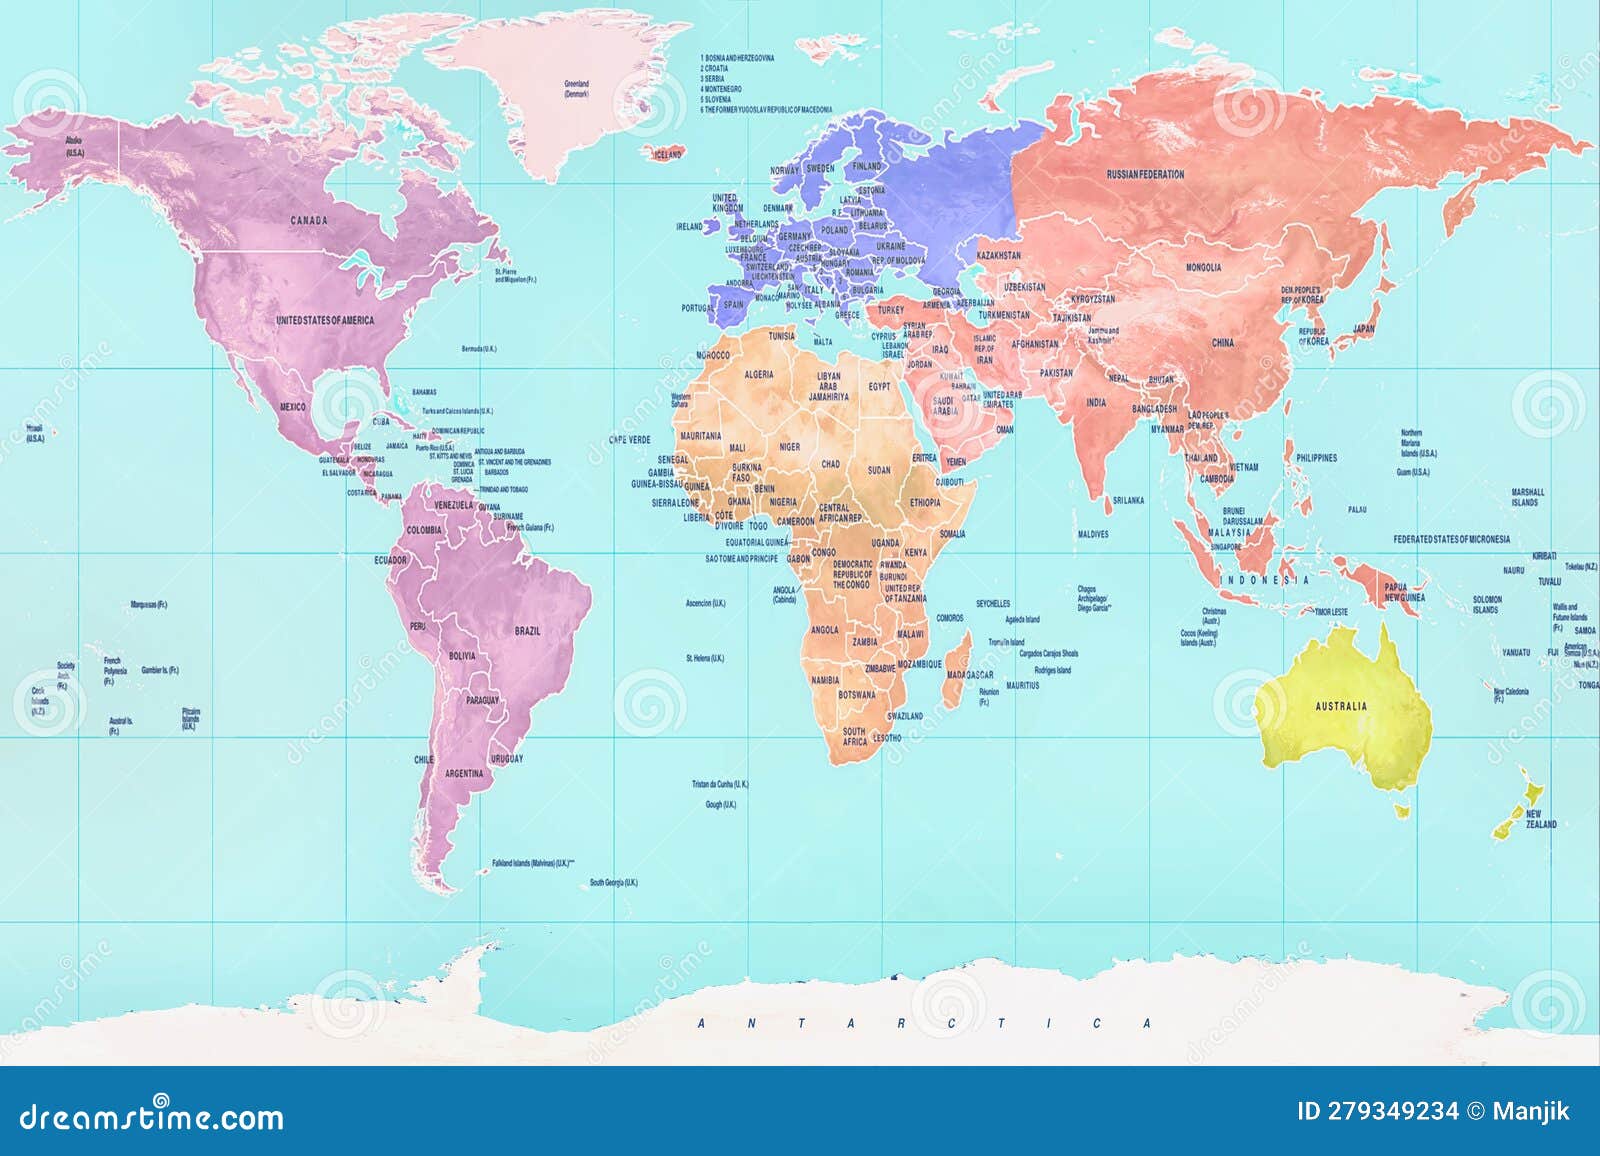 Colorful World Map stock illustration. Illustration of colorful - 279349234